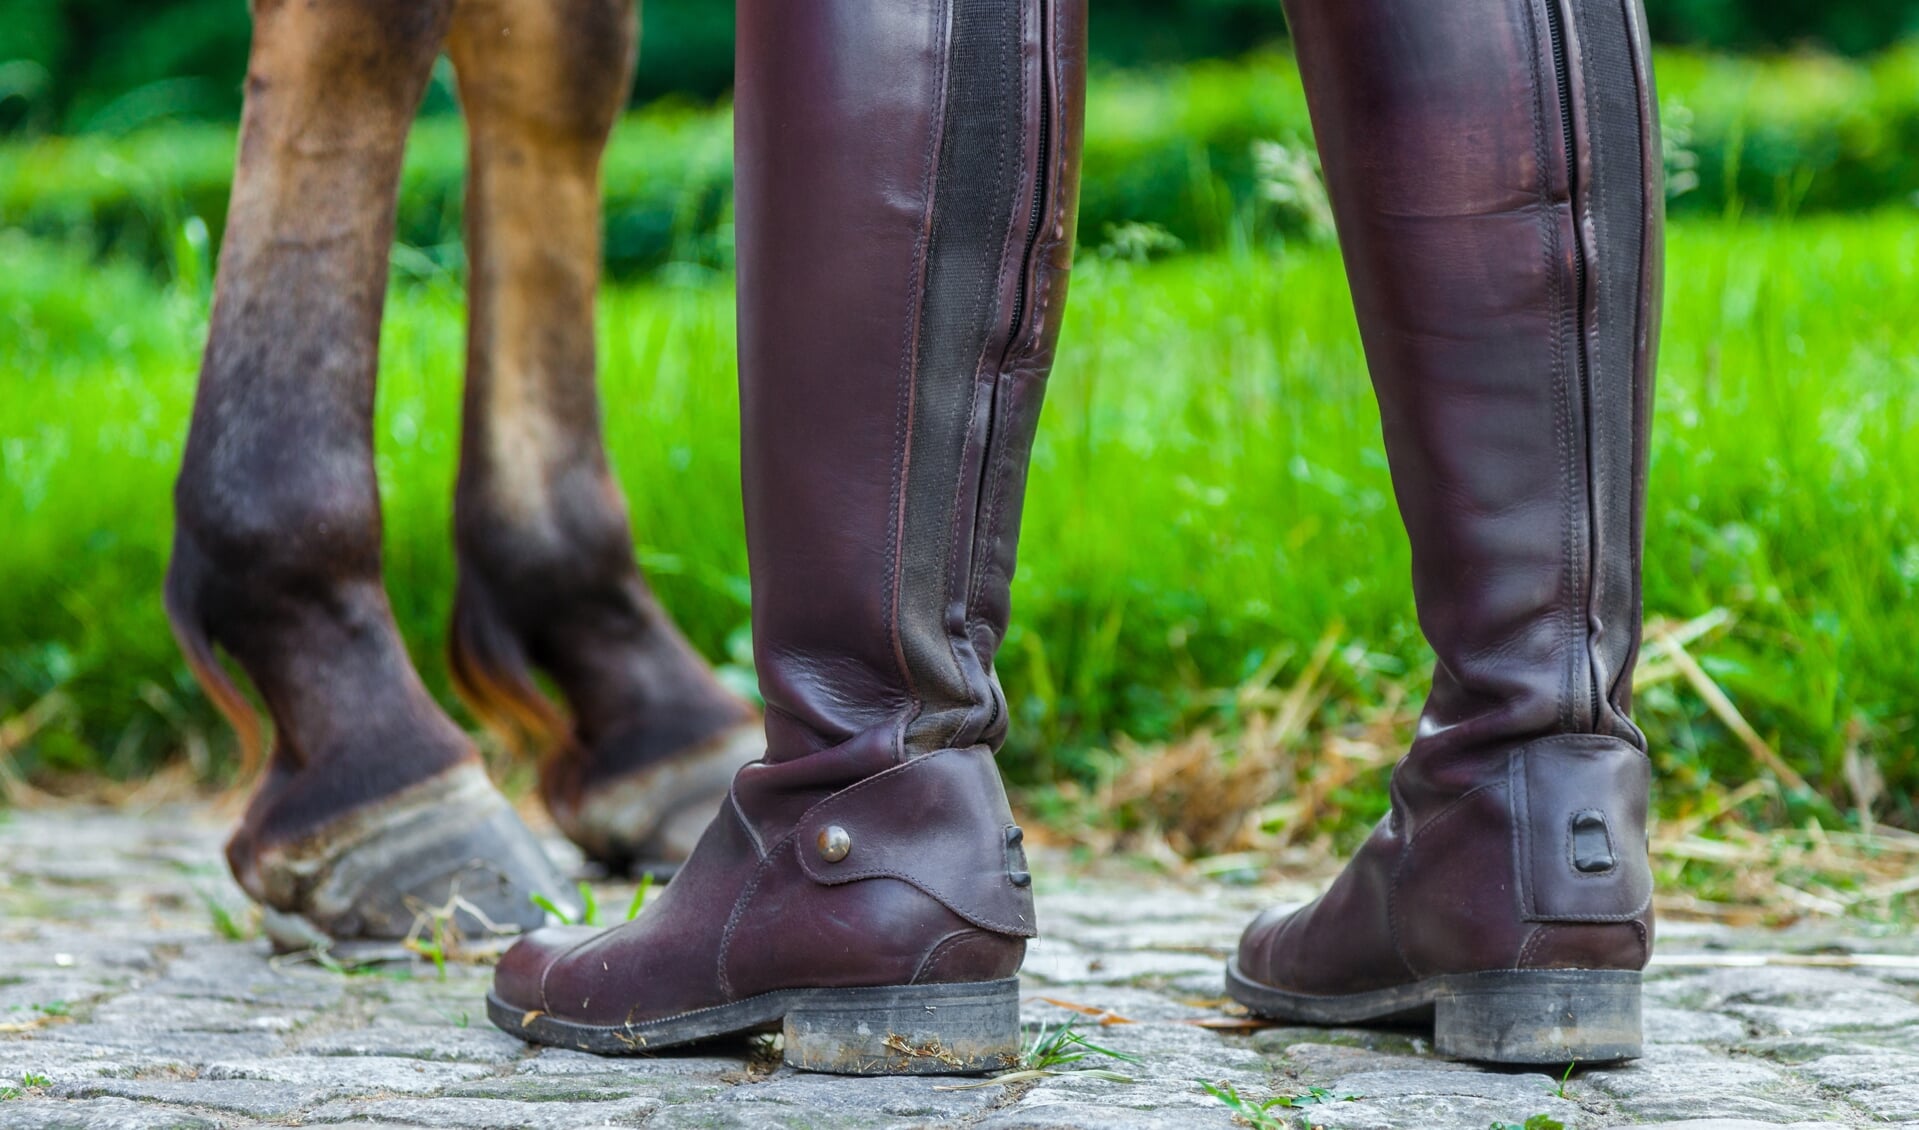 a horsewoman in riding boots near a horse